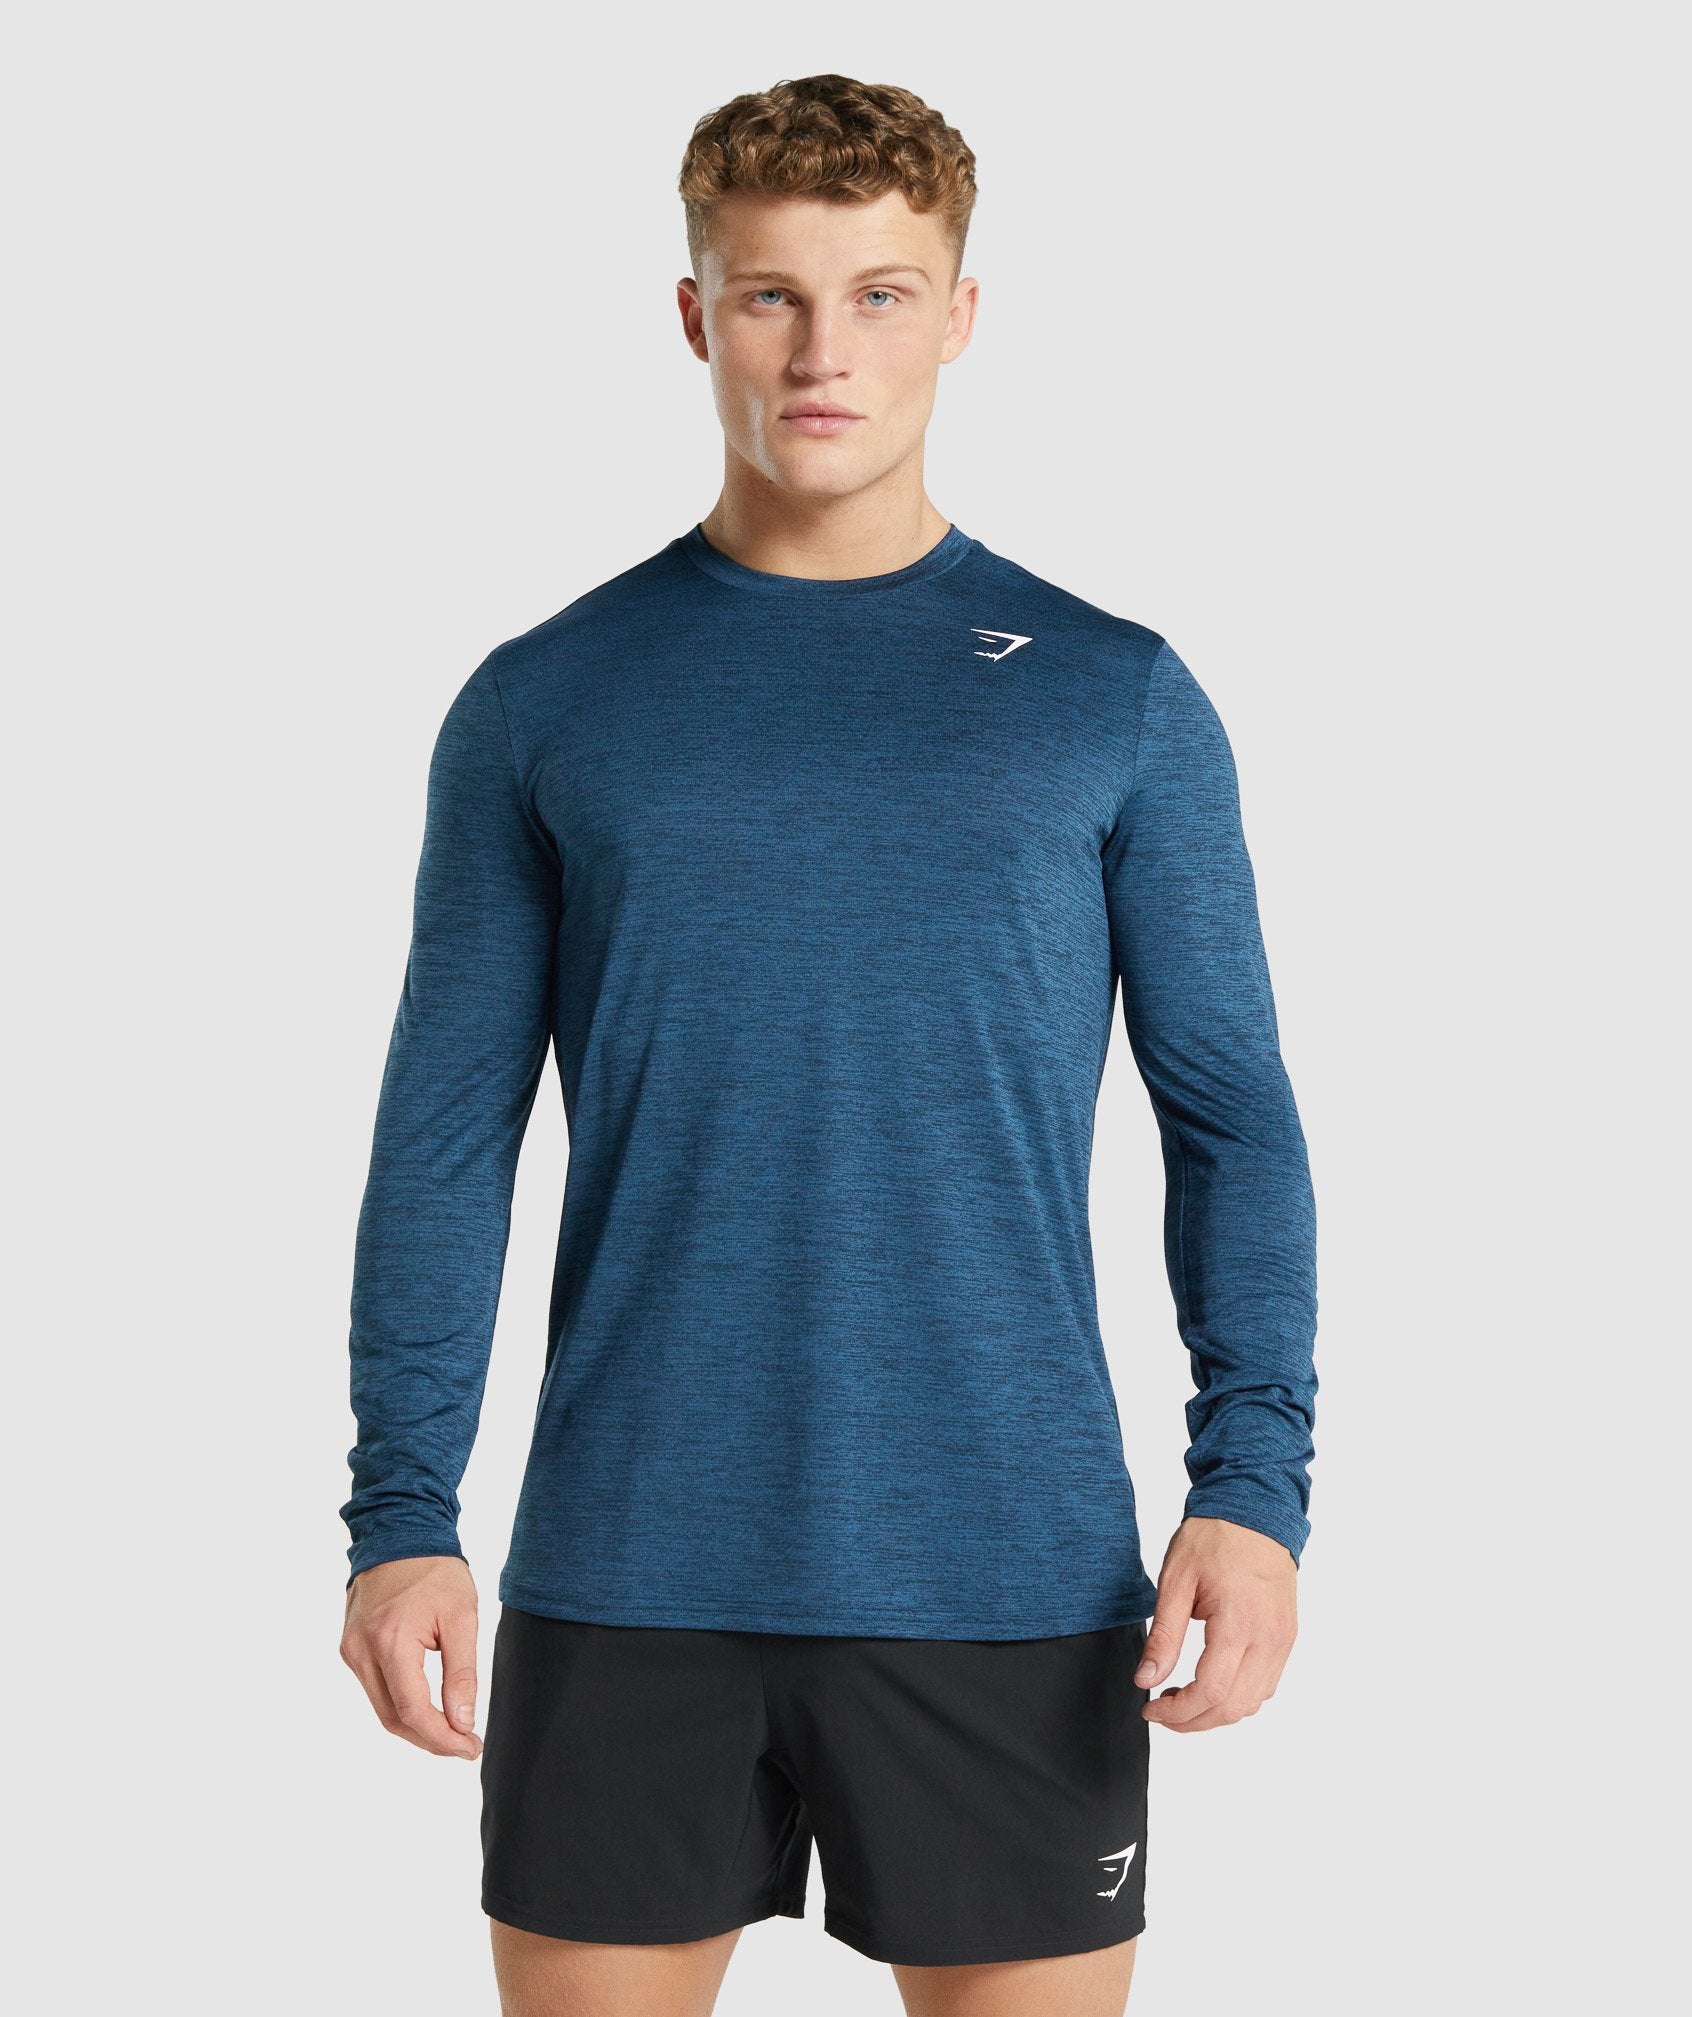 Arrival Marl Long Sleeve T-Shirt in Navy Marl - view 1